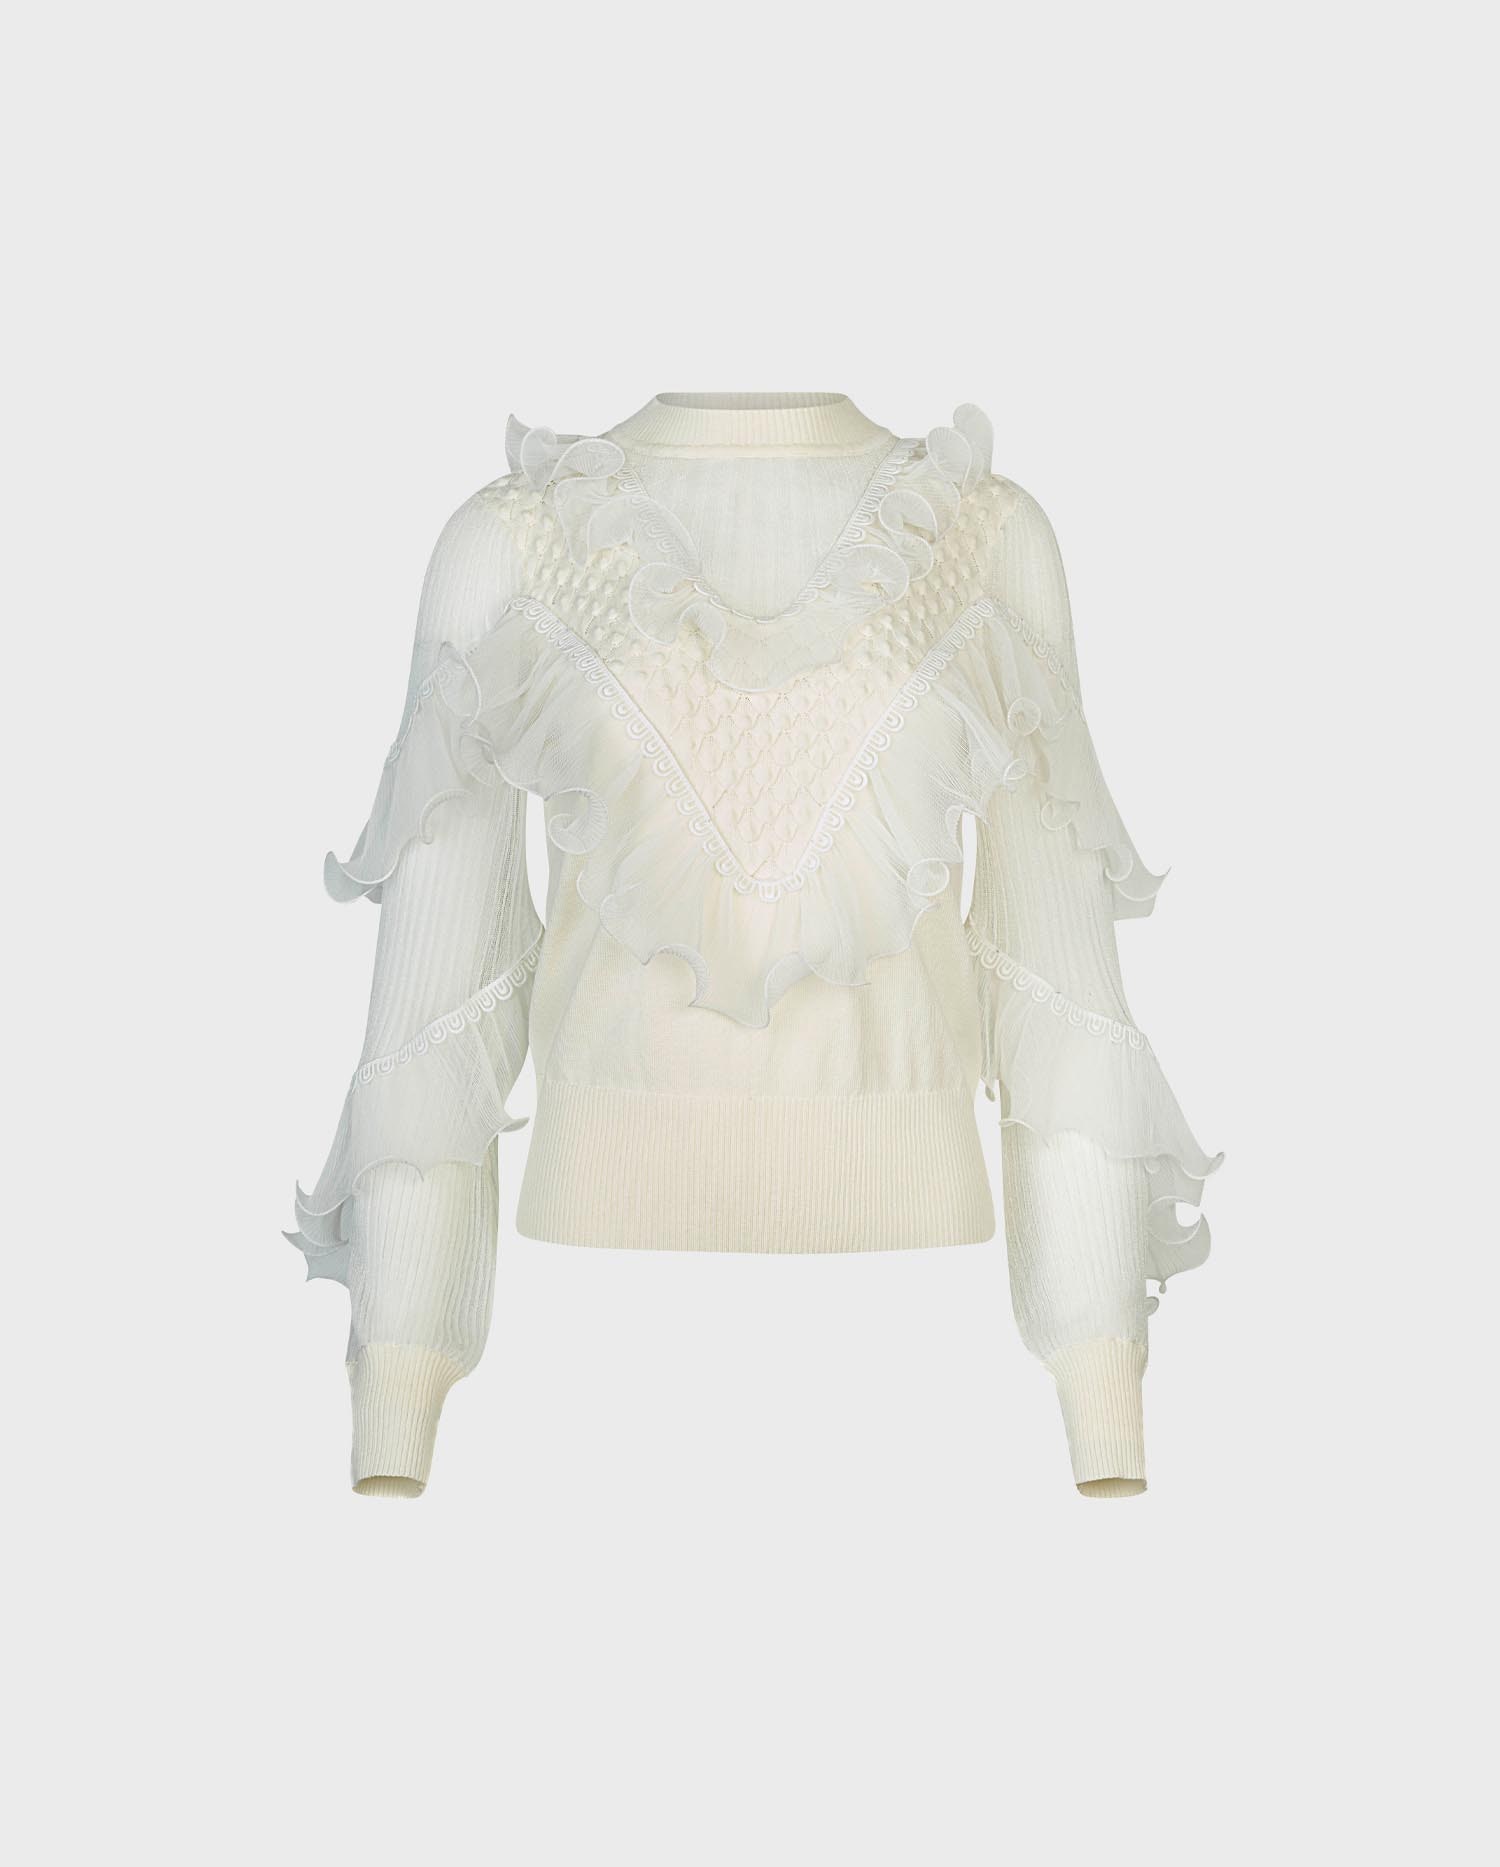 Discover the OEUVRE Long sleeve white knit with sheer details and cascading ruffles from ANNE FONTAINE